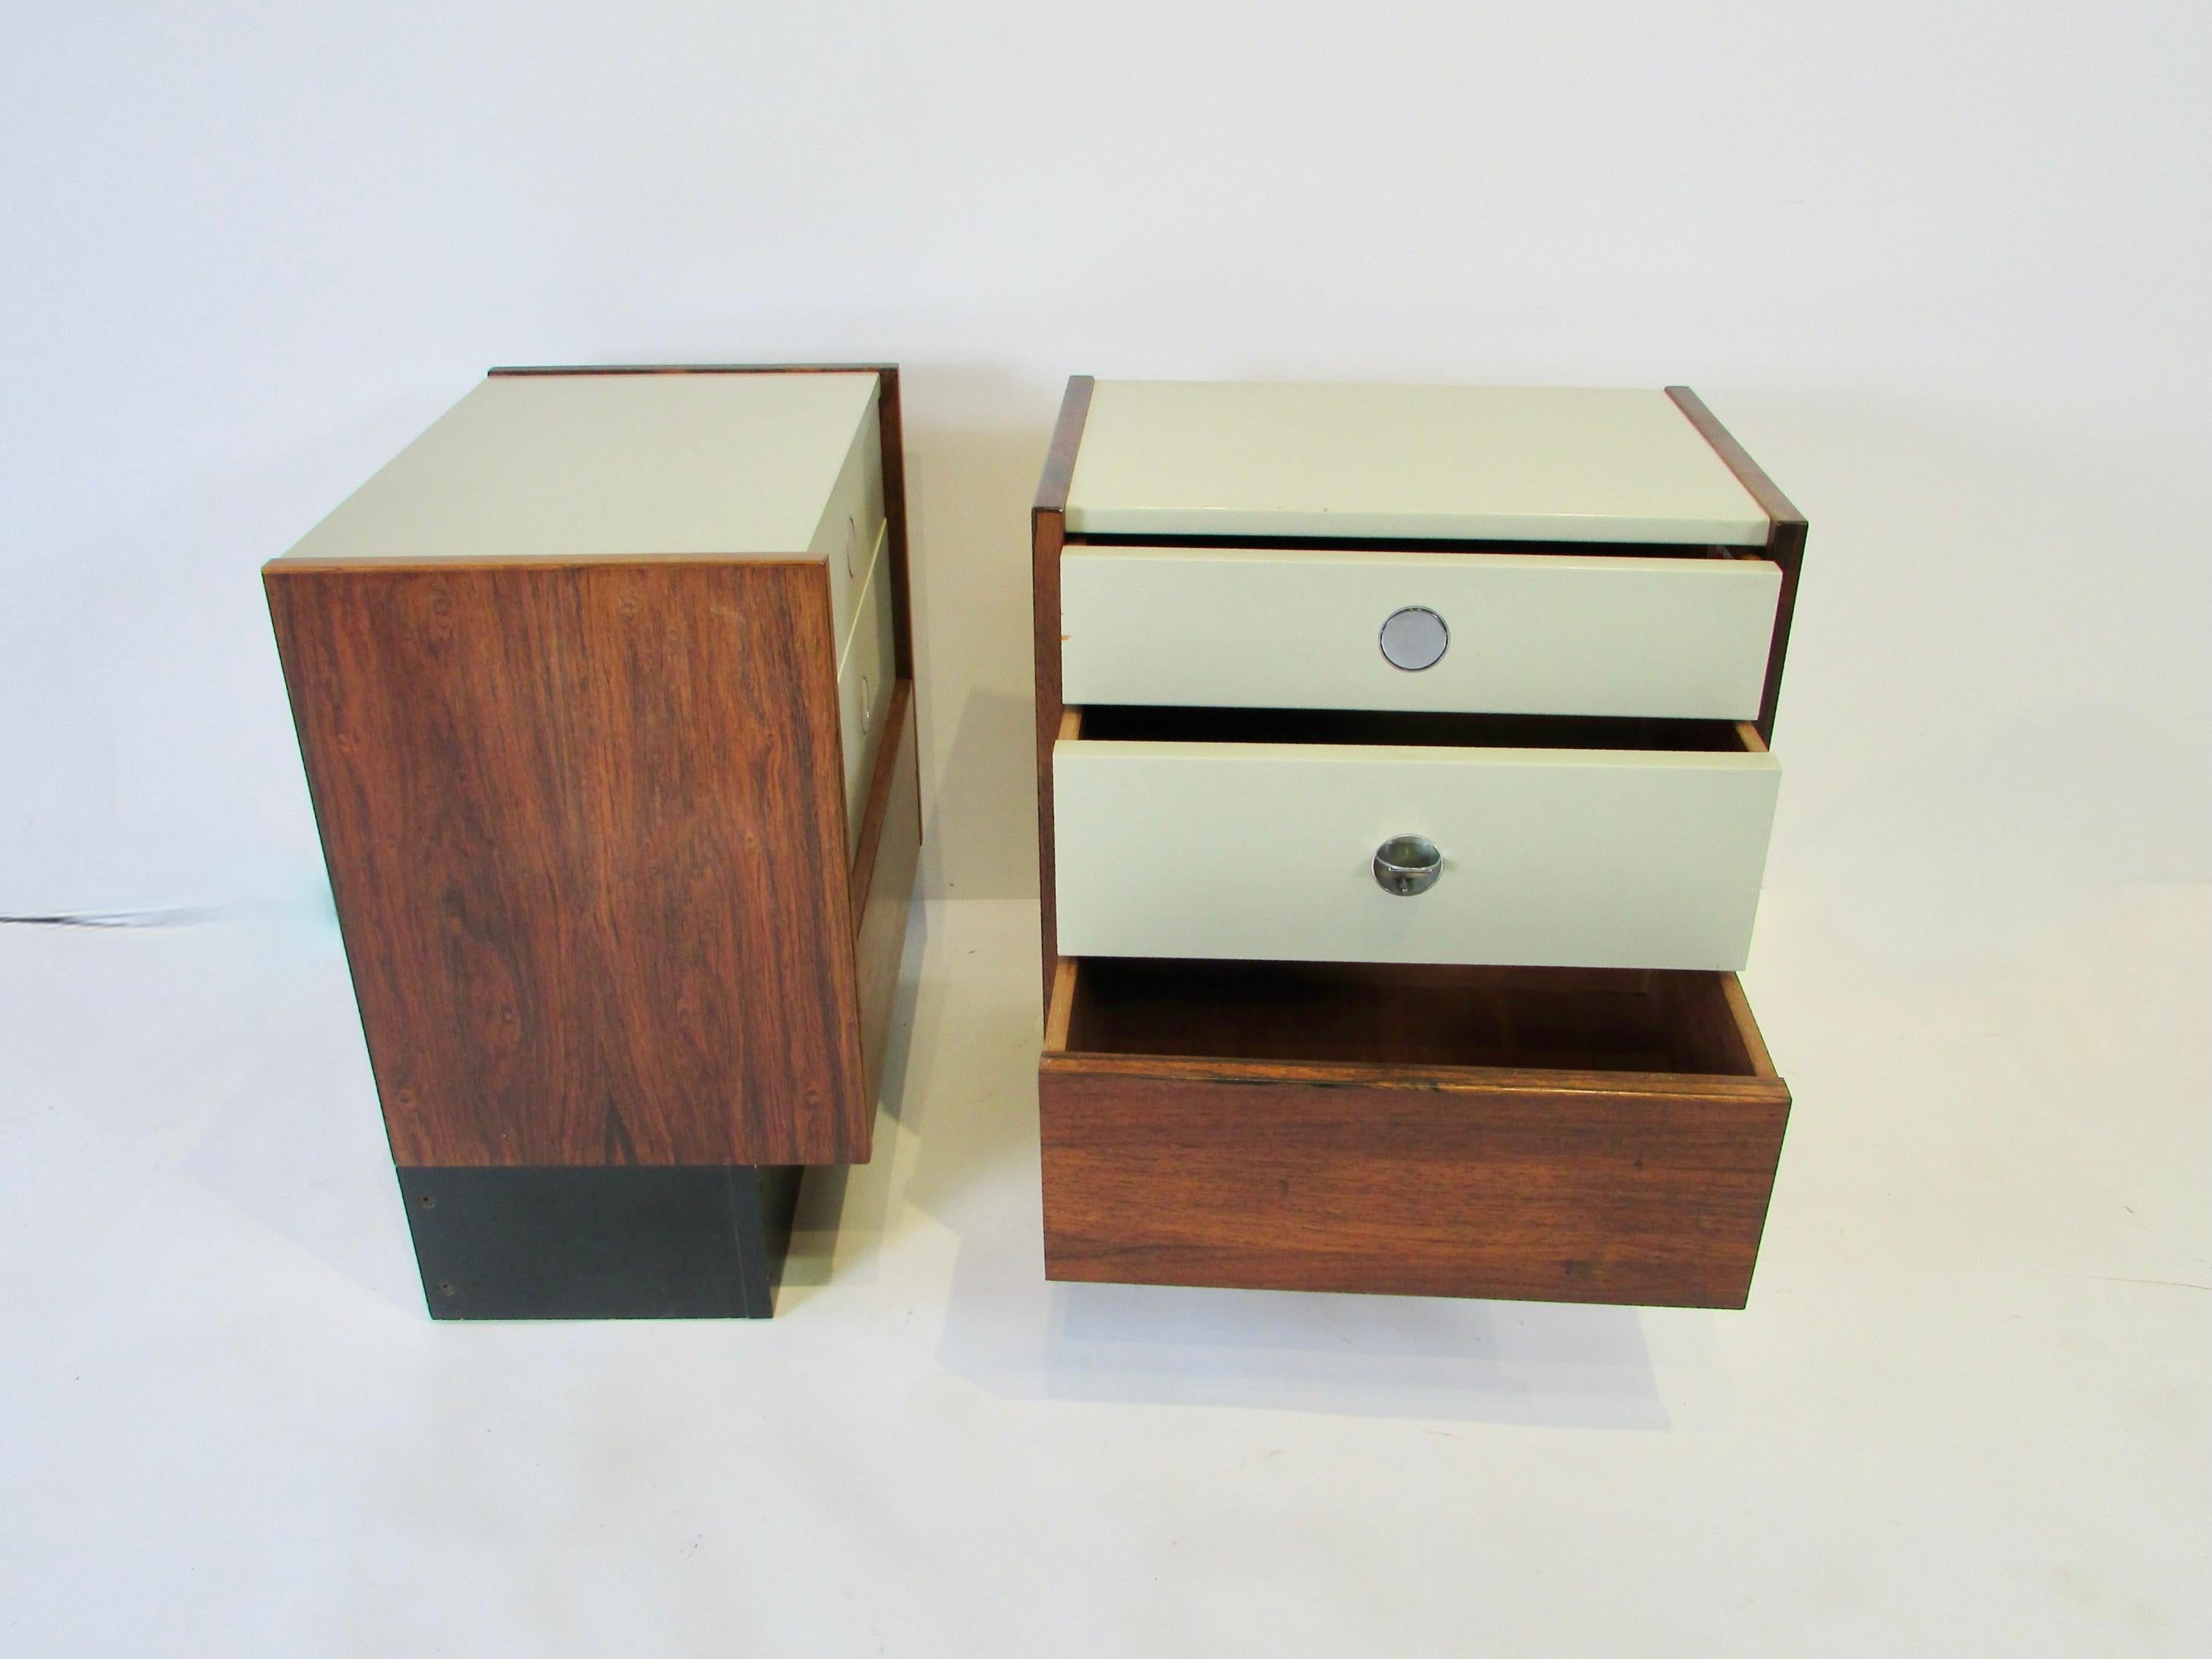 Pair of Drylund Denmark Lacquered Drawer Rosewood Cabinet Night Stands 1